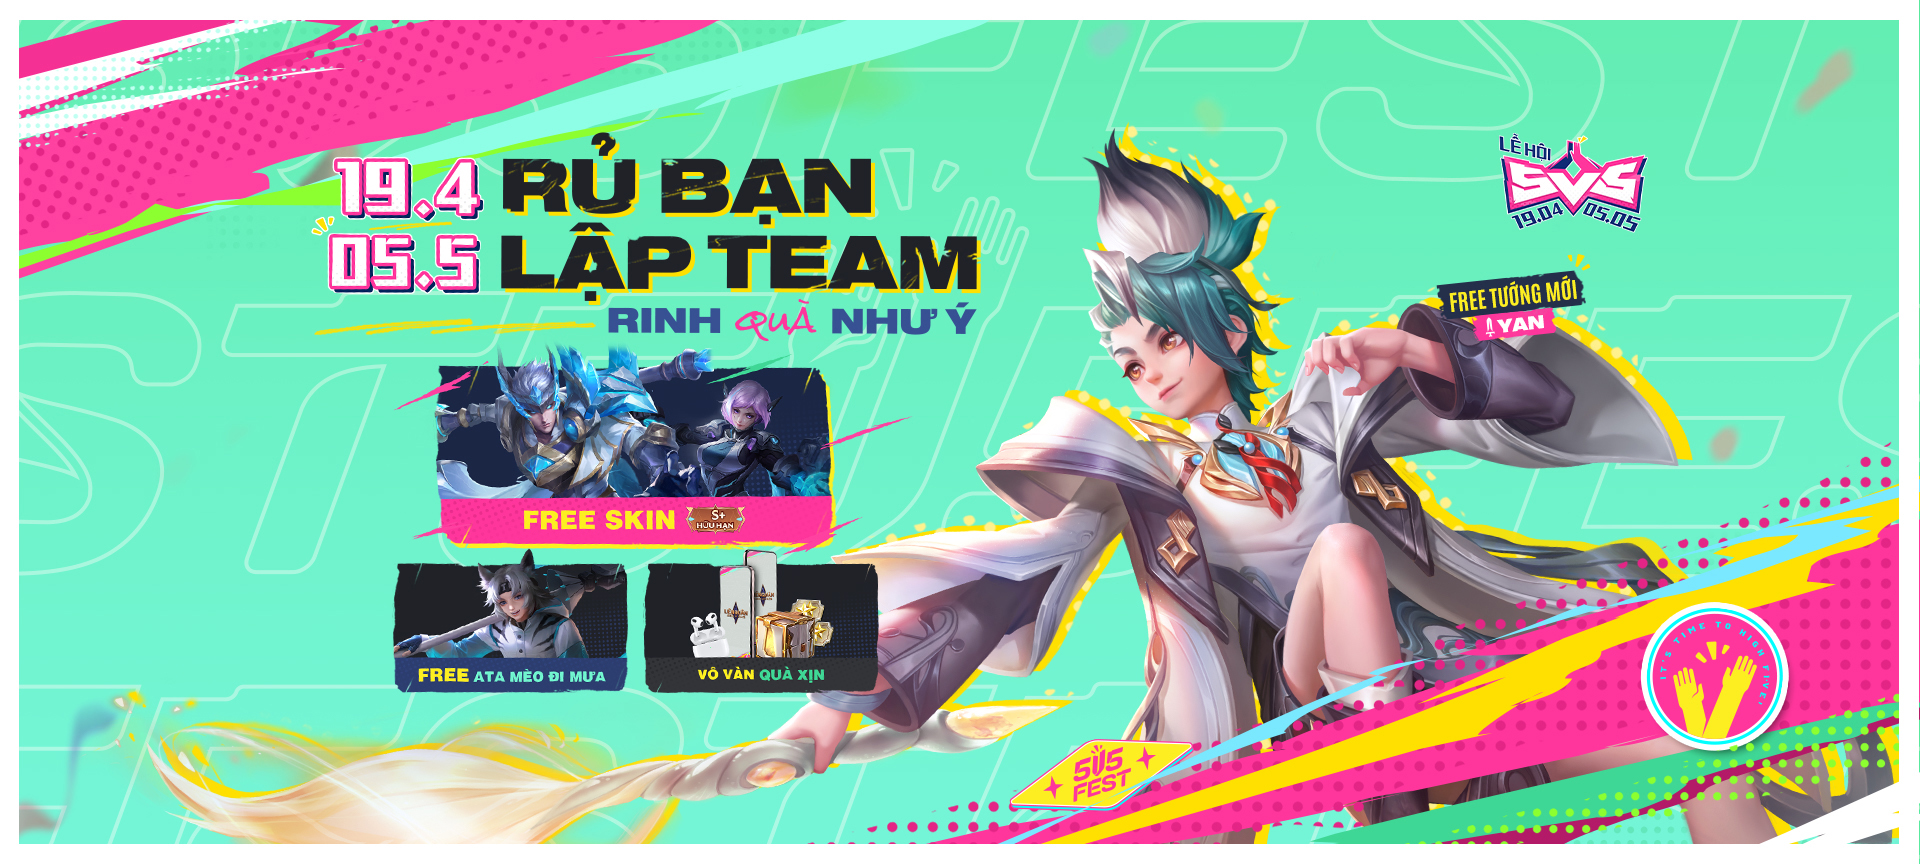 HOT: Lien Quan gamers receive free new general Yan and 1 skin of S + level in the event to celebrate the new version - Photo 3.